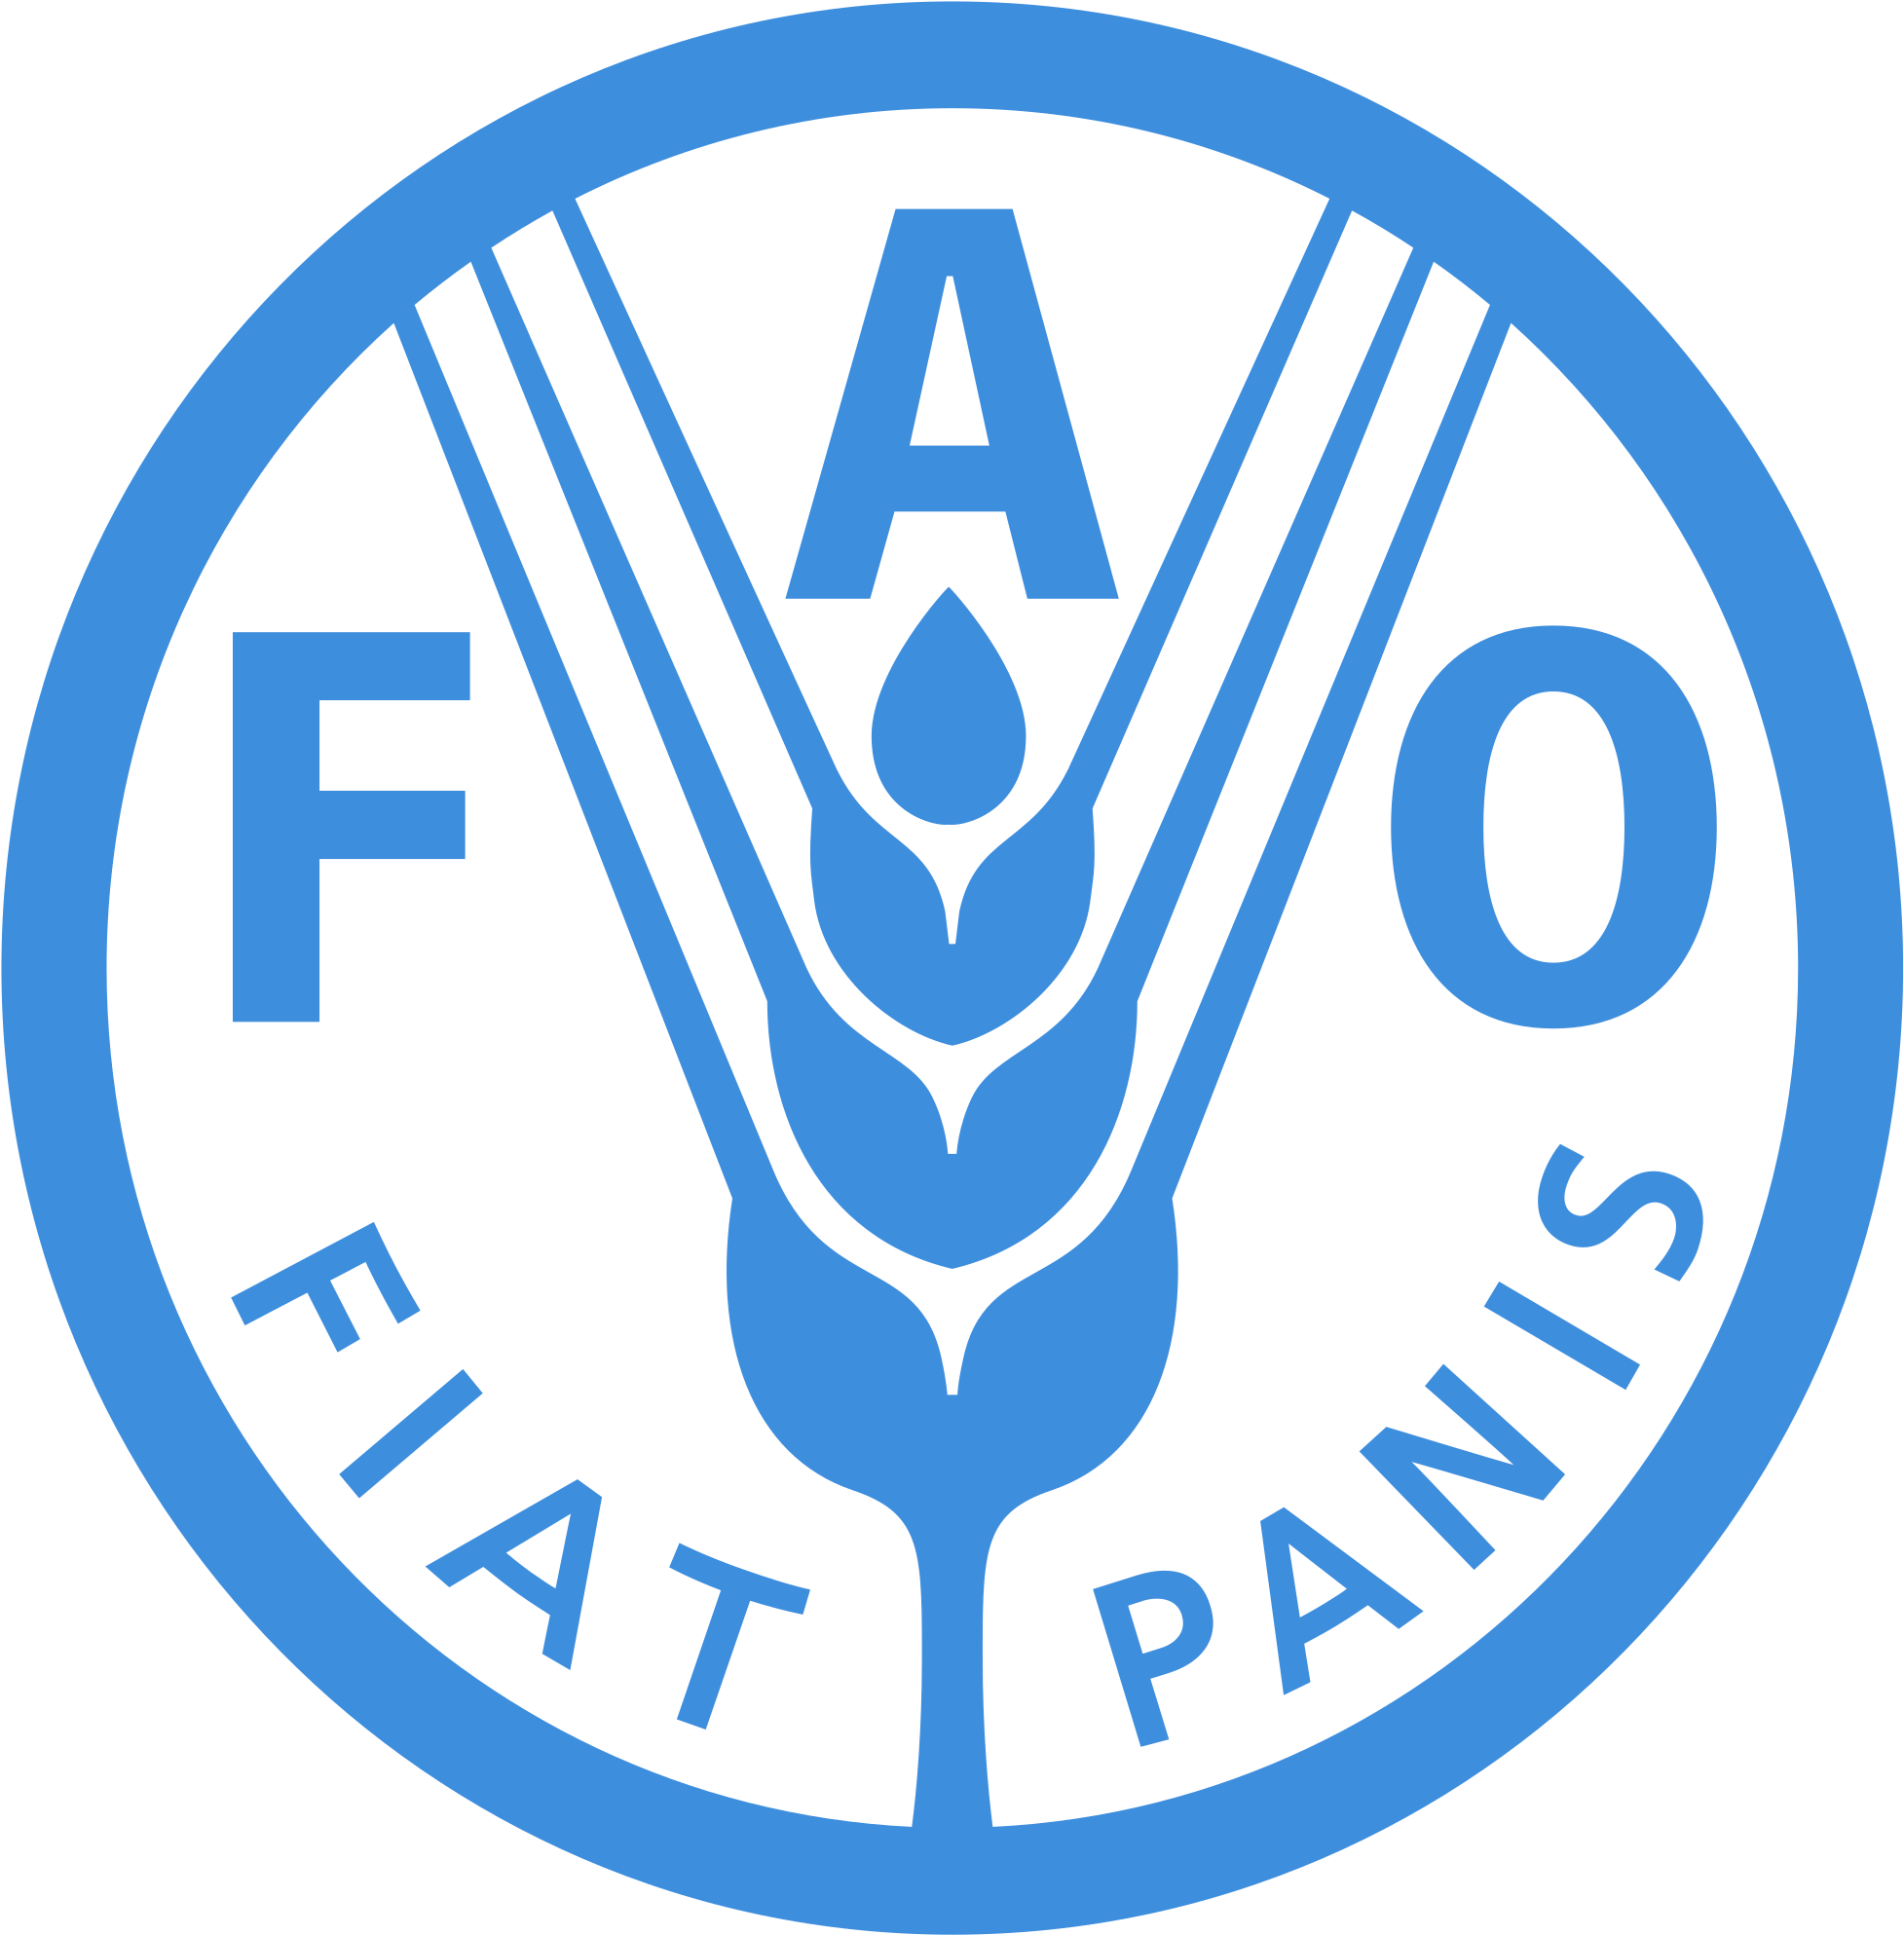 Fao - Food And Agriculture Organization Of The United Nations (2000x2031)